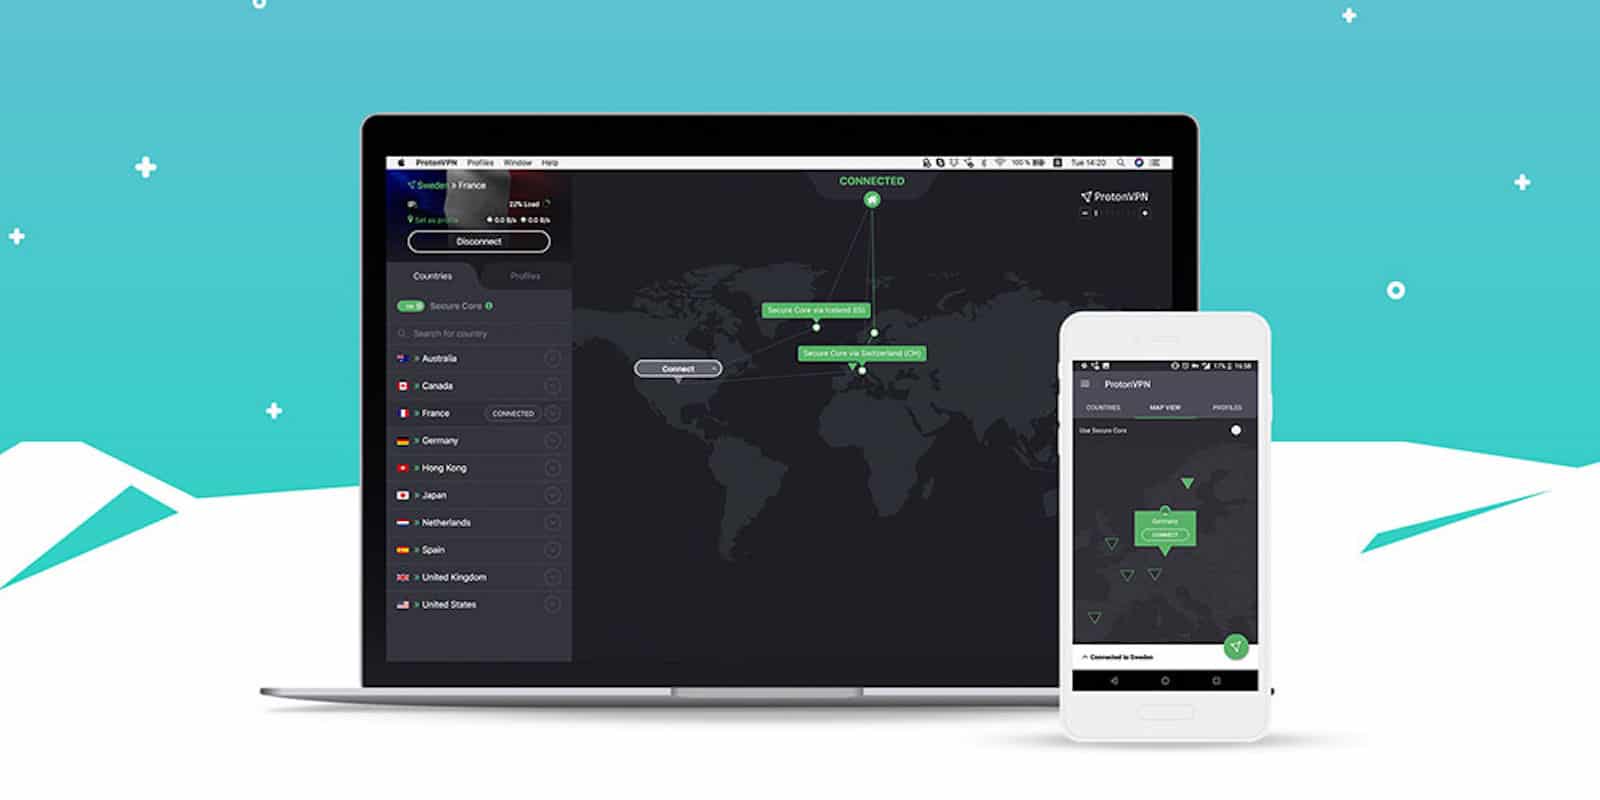 This VPN provider is backed by super secure encryption, Swiss data privacy laws, and lots more.